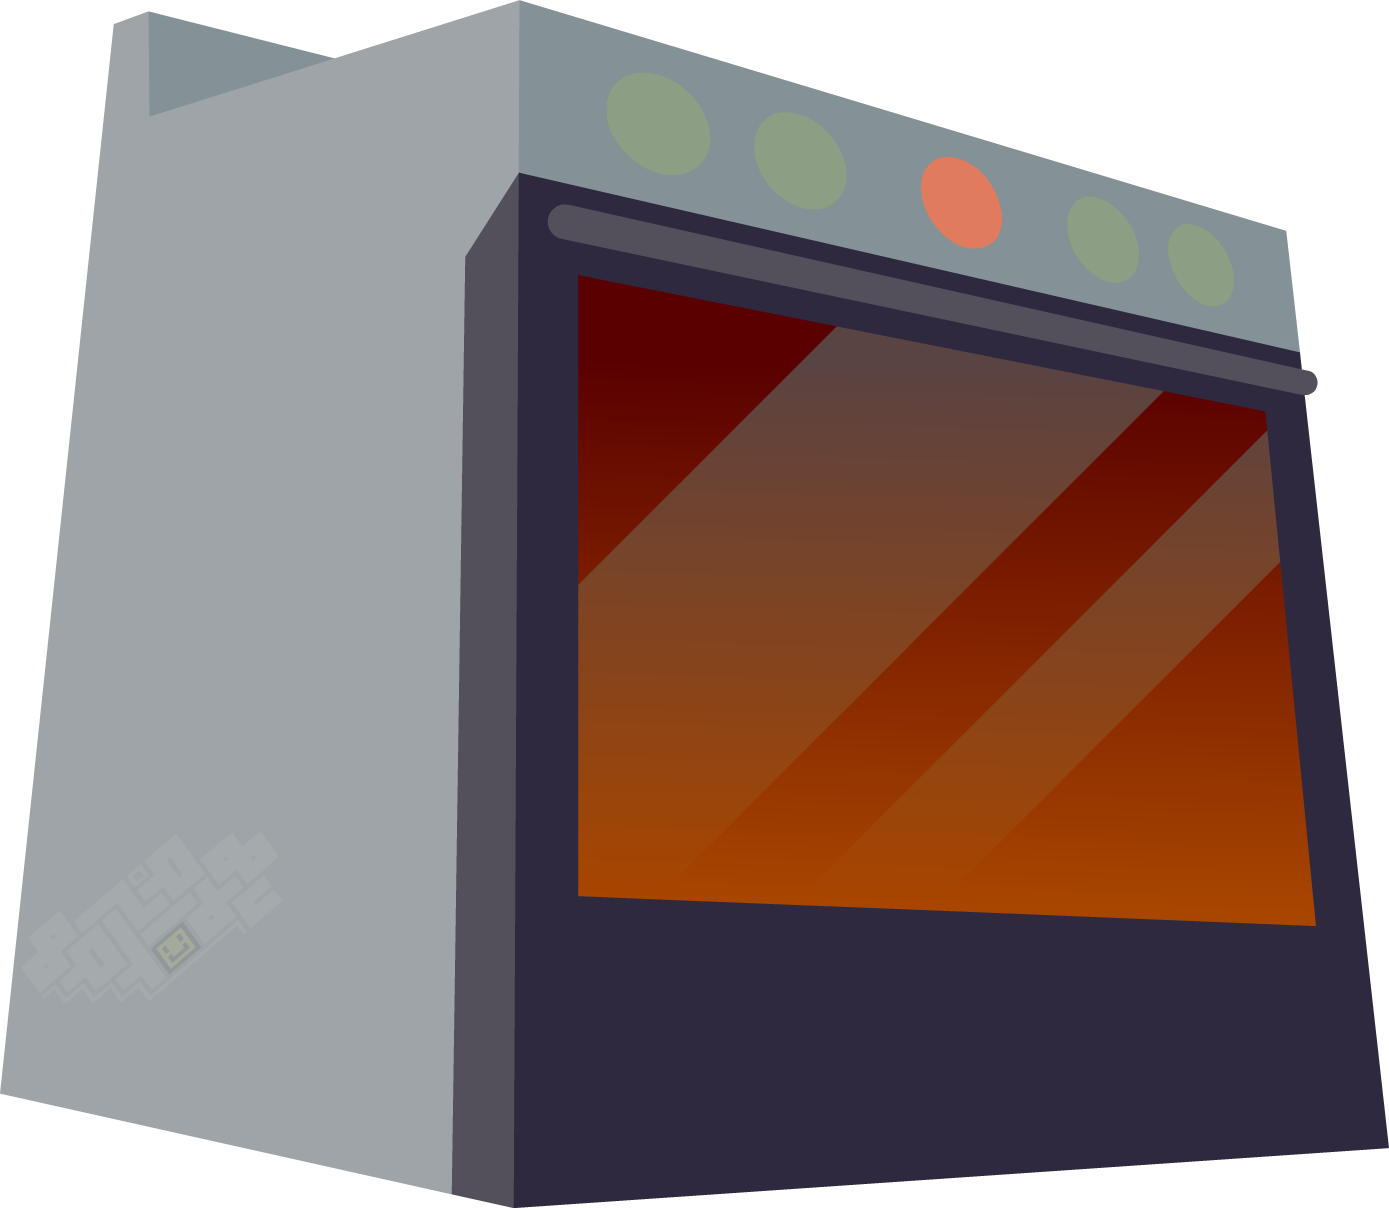 The Worlds Largest Oven - Bfdi Oven (1389x1208), Png Download